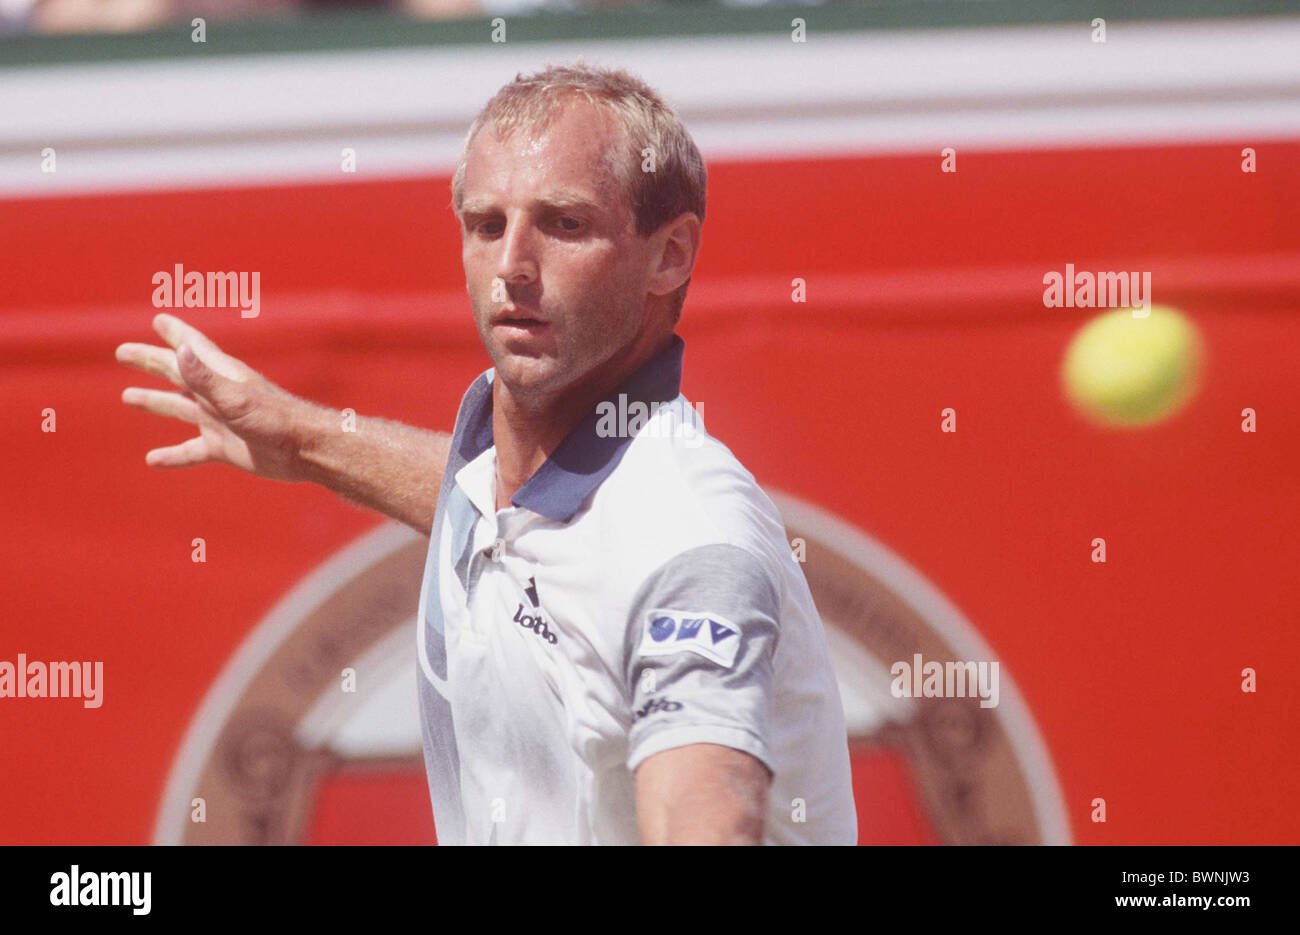 THOMAS MUSTER DURING SEMI-FINAL OF THE STELLA ARTOIS TENNIS TOURNAMENT AT THE QUEEN'S CLUB, LONDON Stock Photo